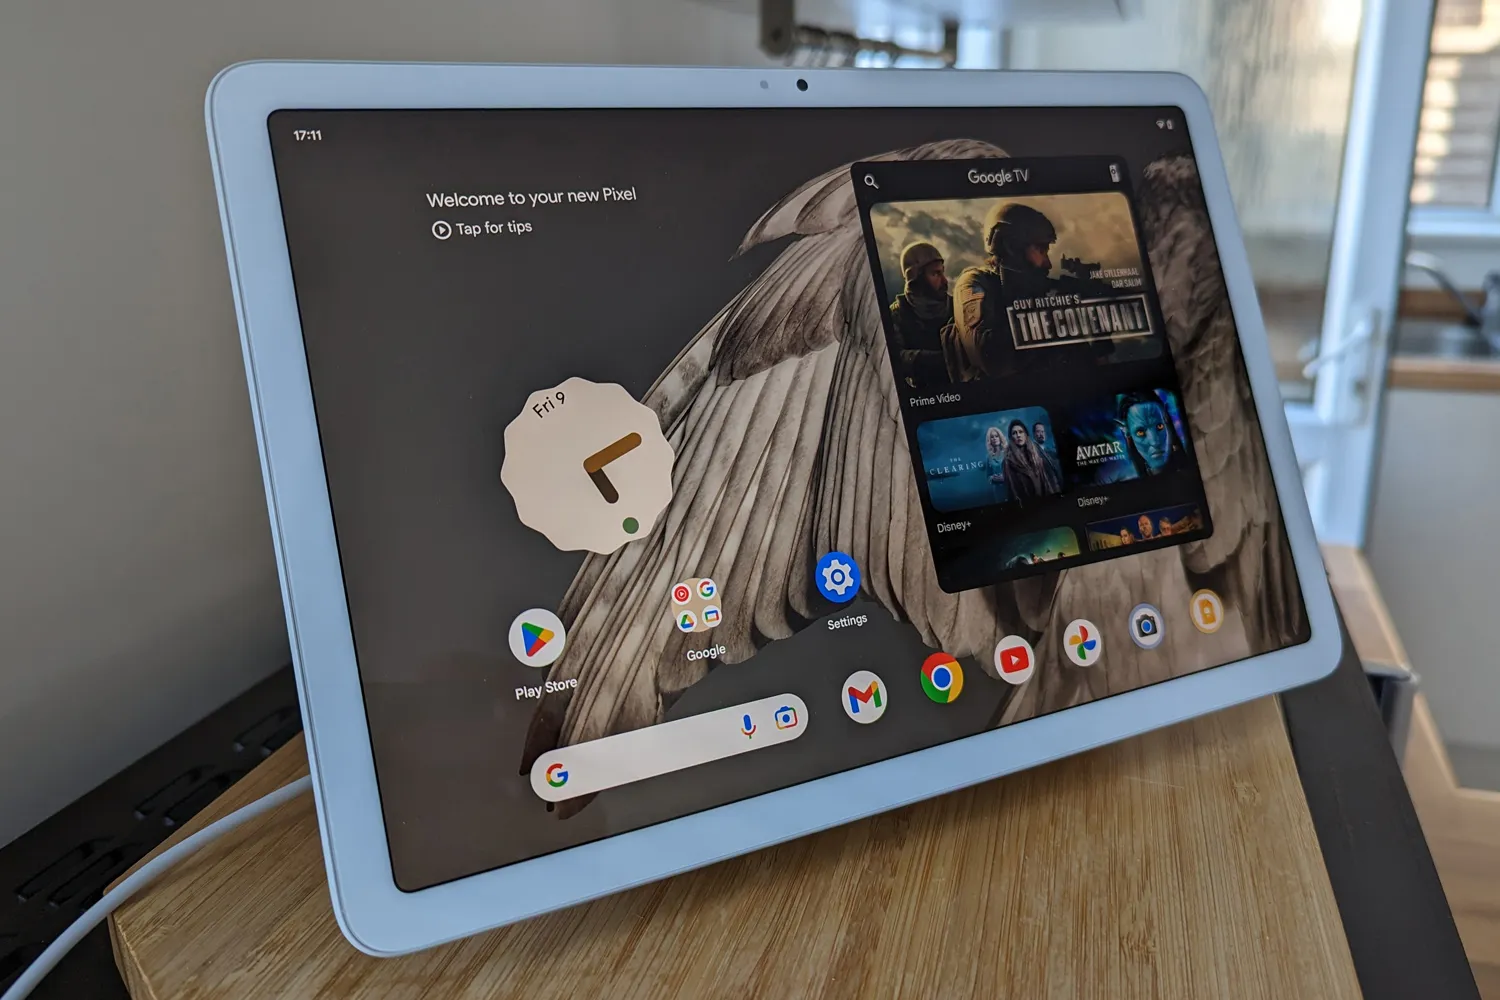 The Pixel Tablet could gain improved stylus capabilities with Android 14